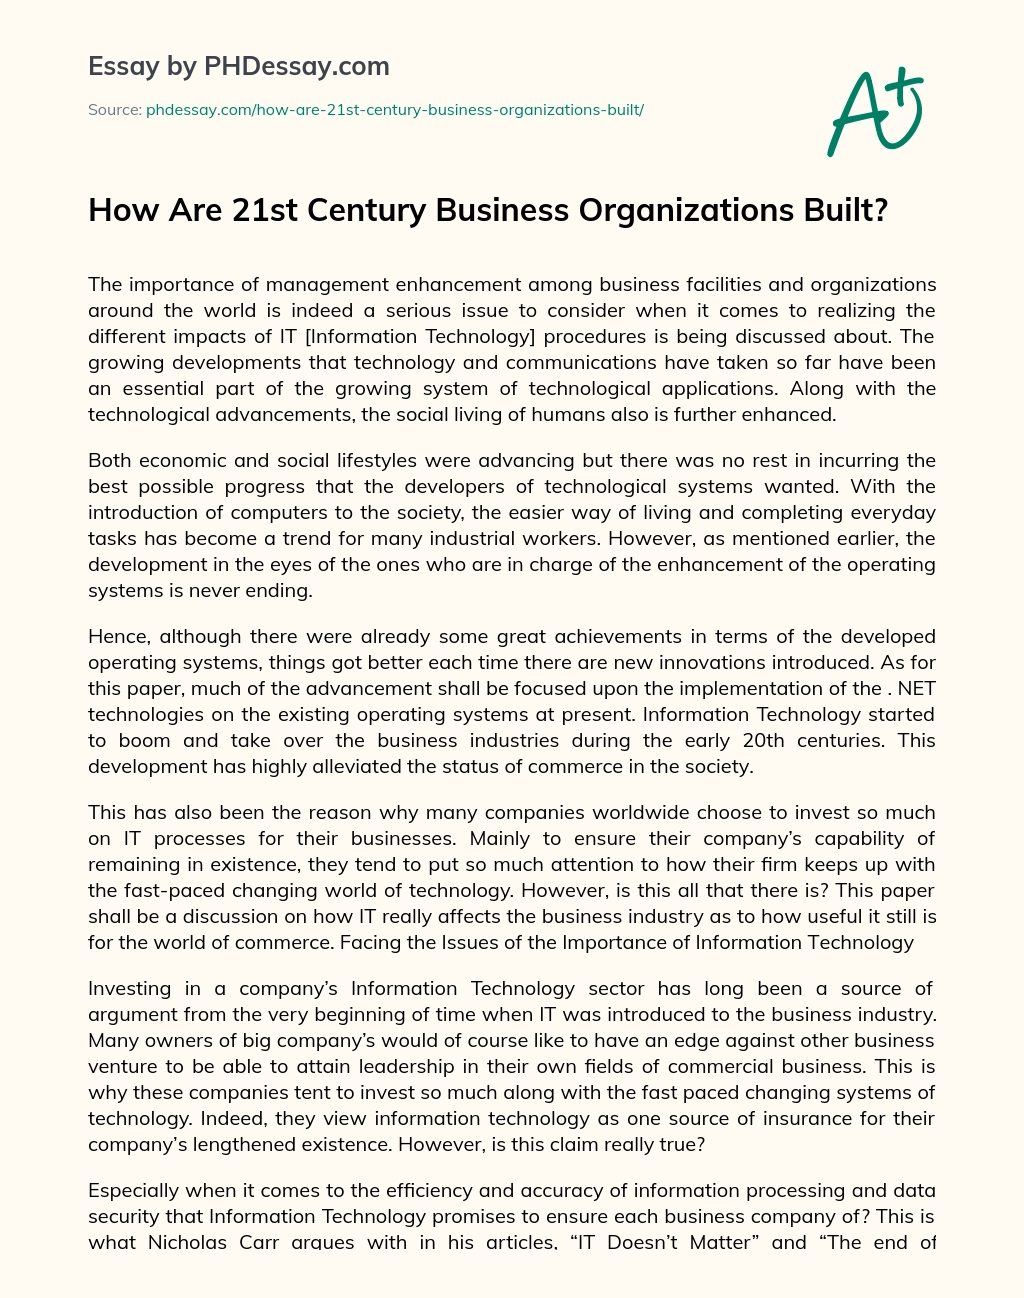 How Are 21st Century Business Organizations Built? essay